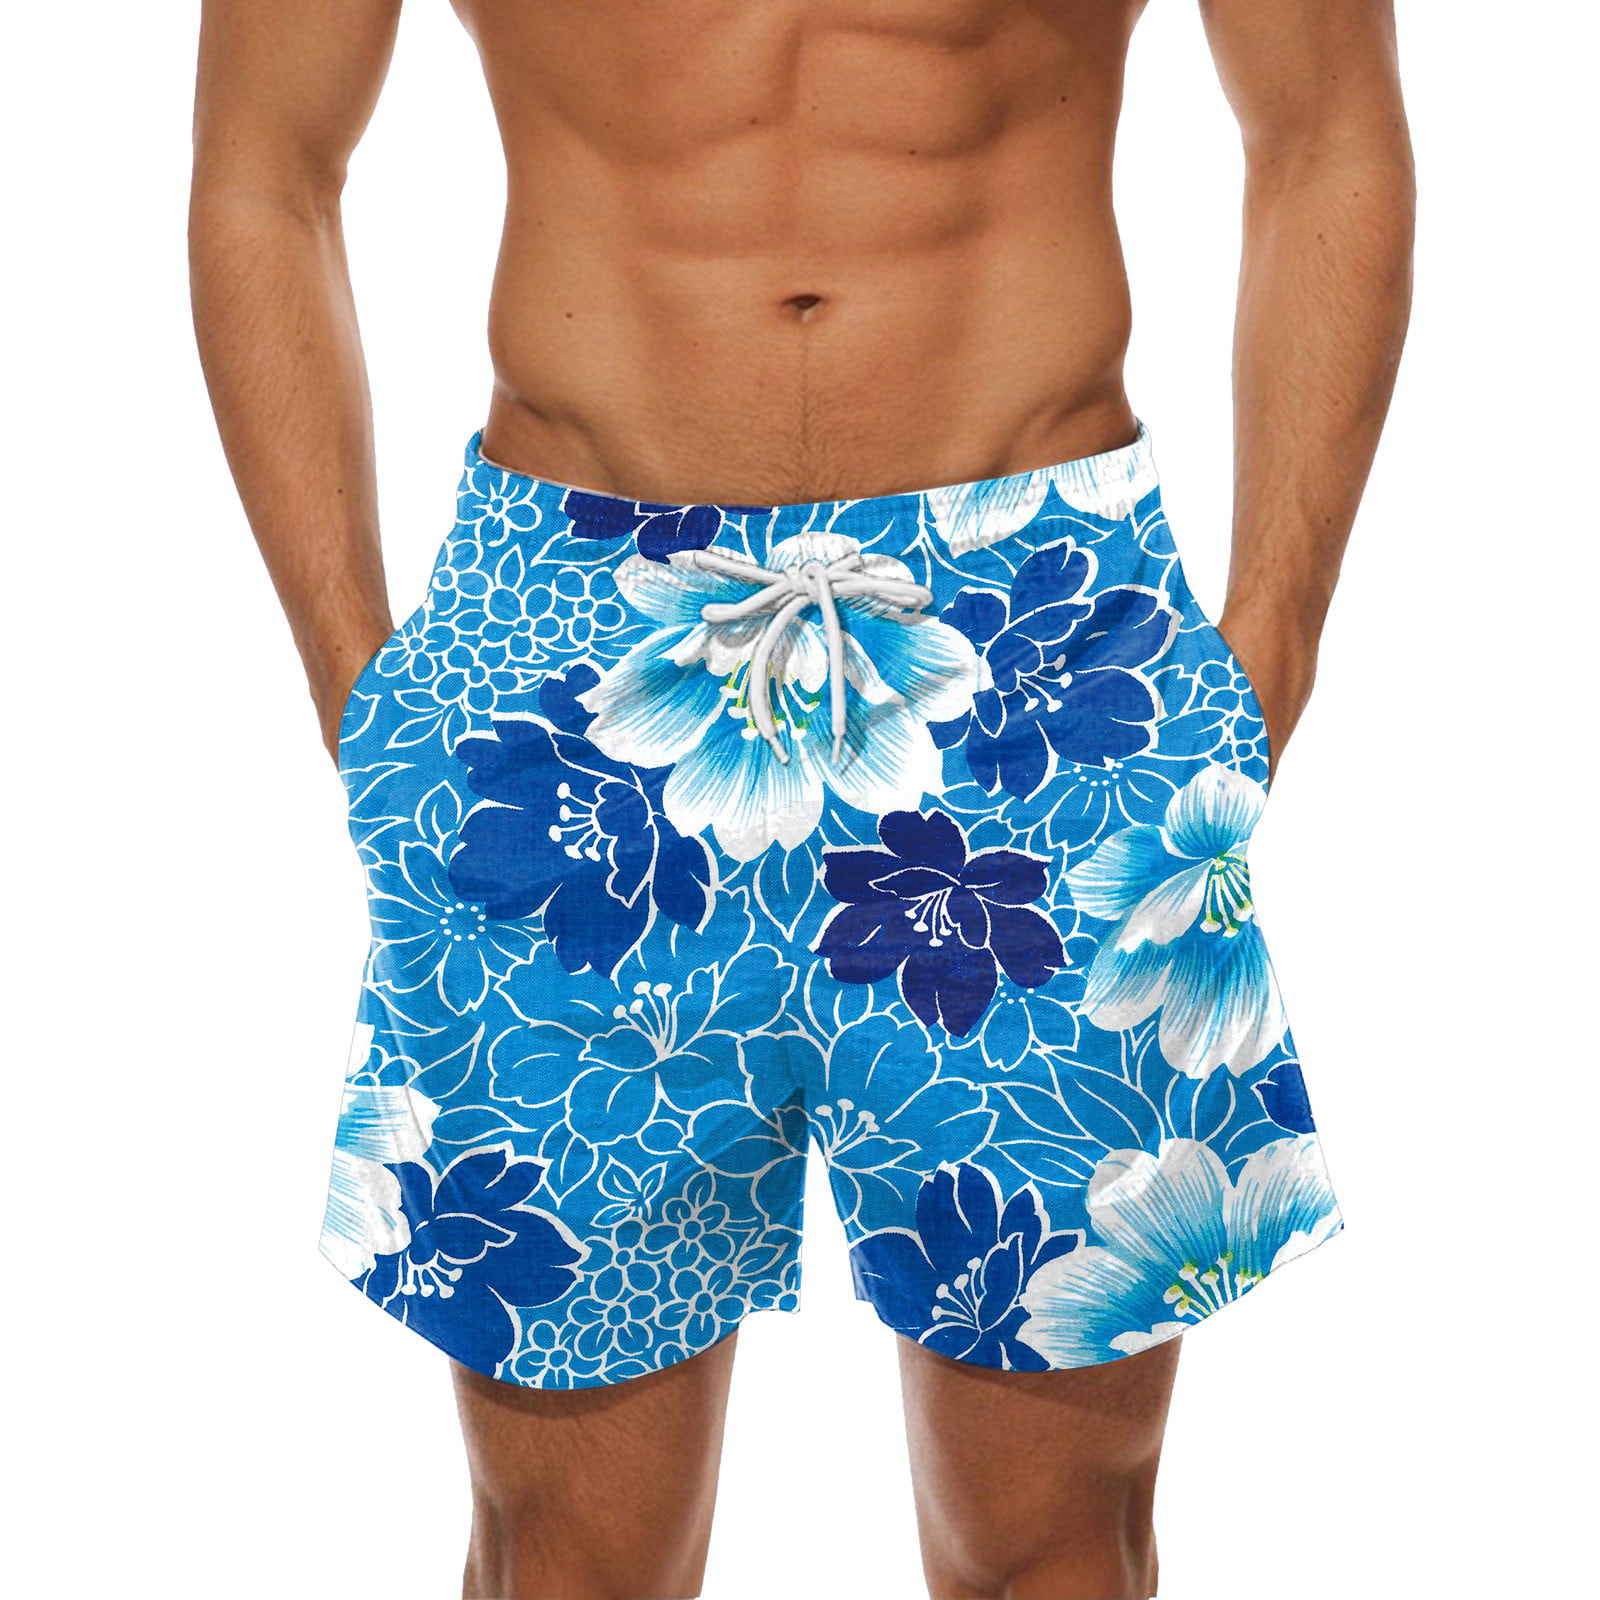 Mens Note Summer Printed Quick Dry Board Shorts Bathing Suits Beach Shorts